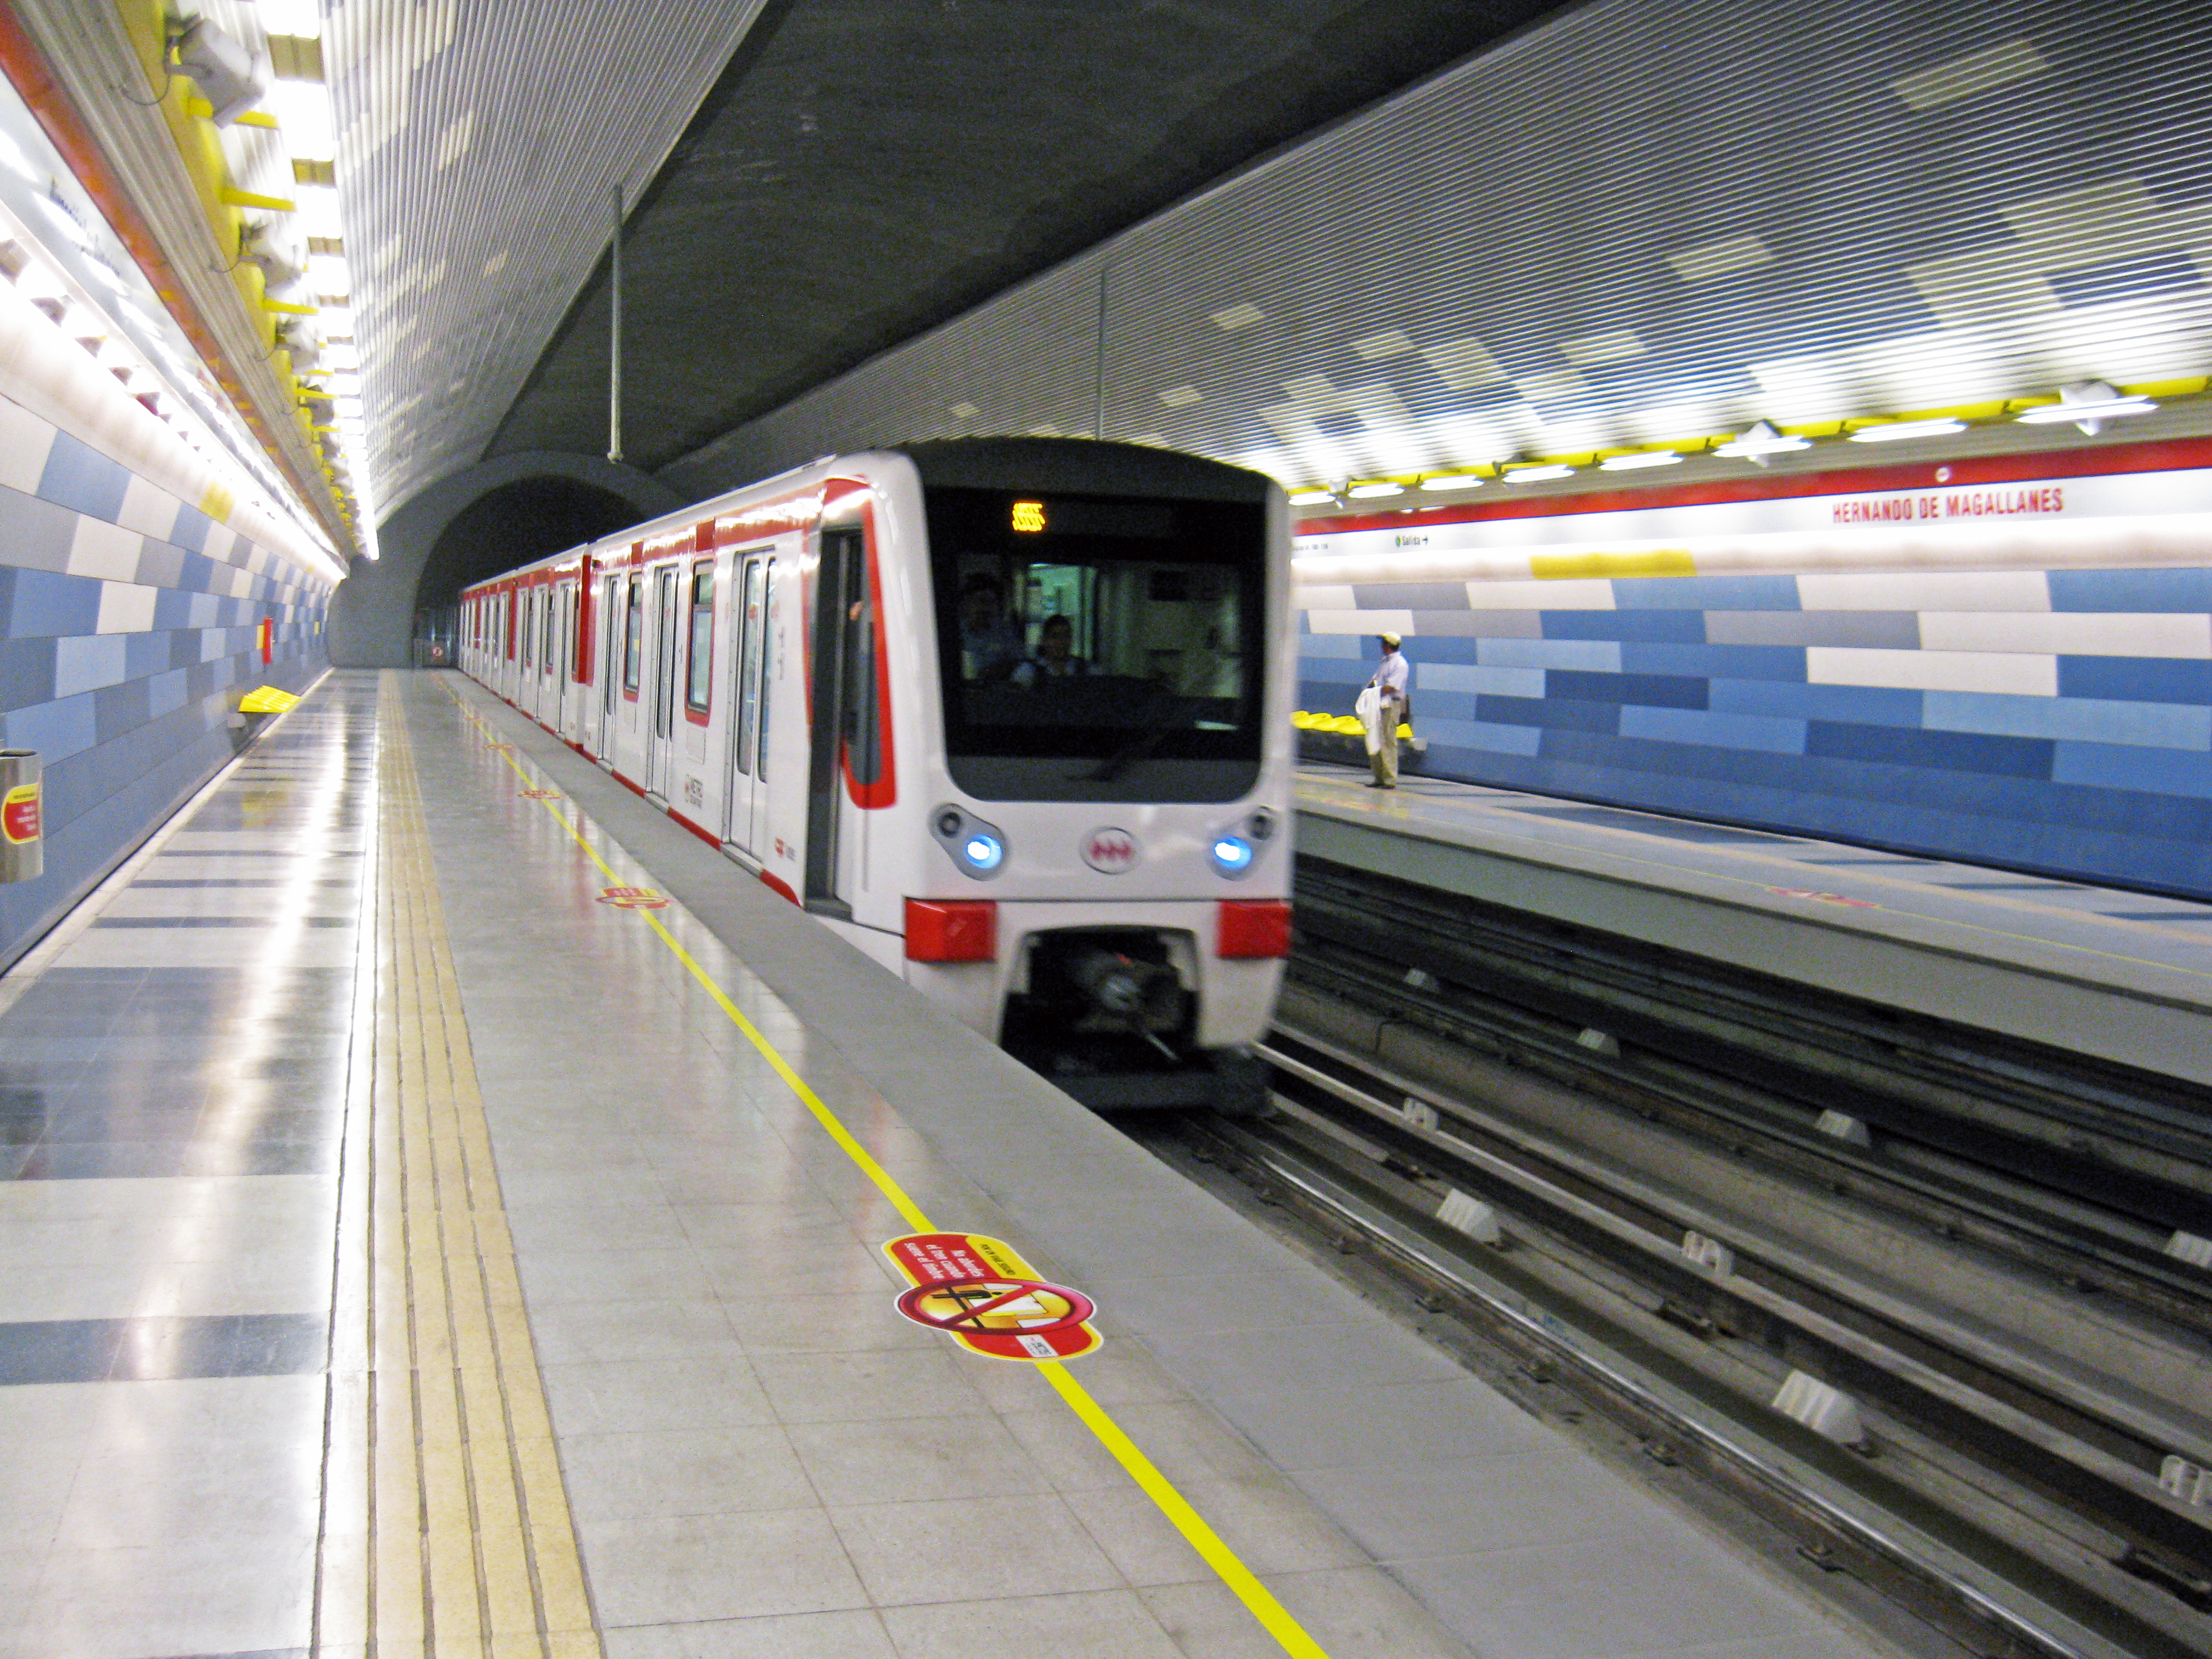 Supply and maintenance of a communications system for the Santiago de Chile Metro Lines 6 and 3 project